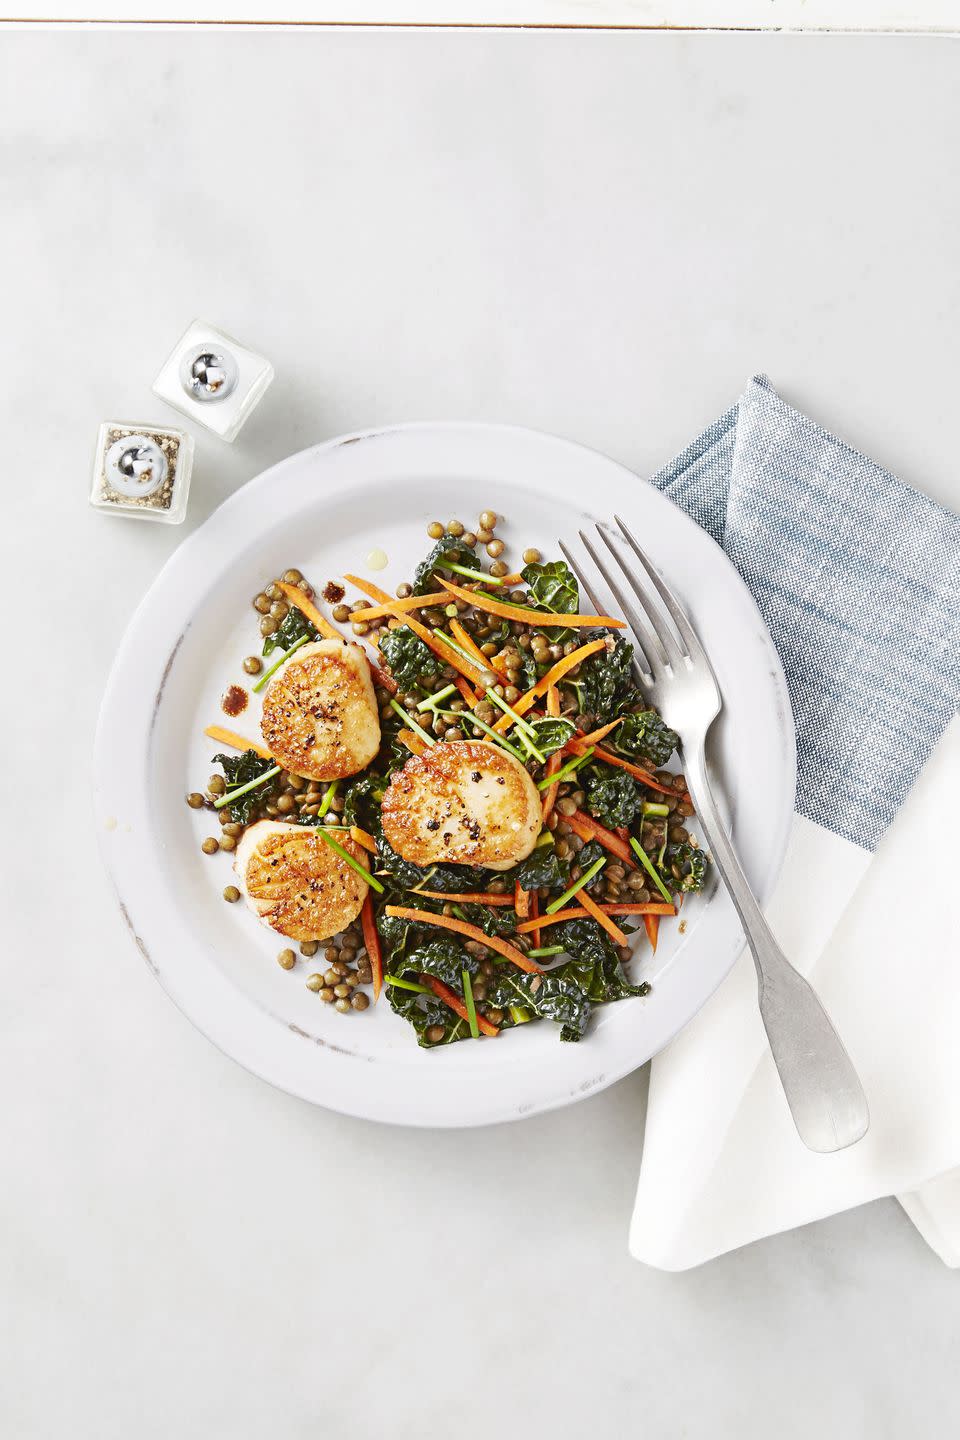 Seared Scallops With Lentil Salad